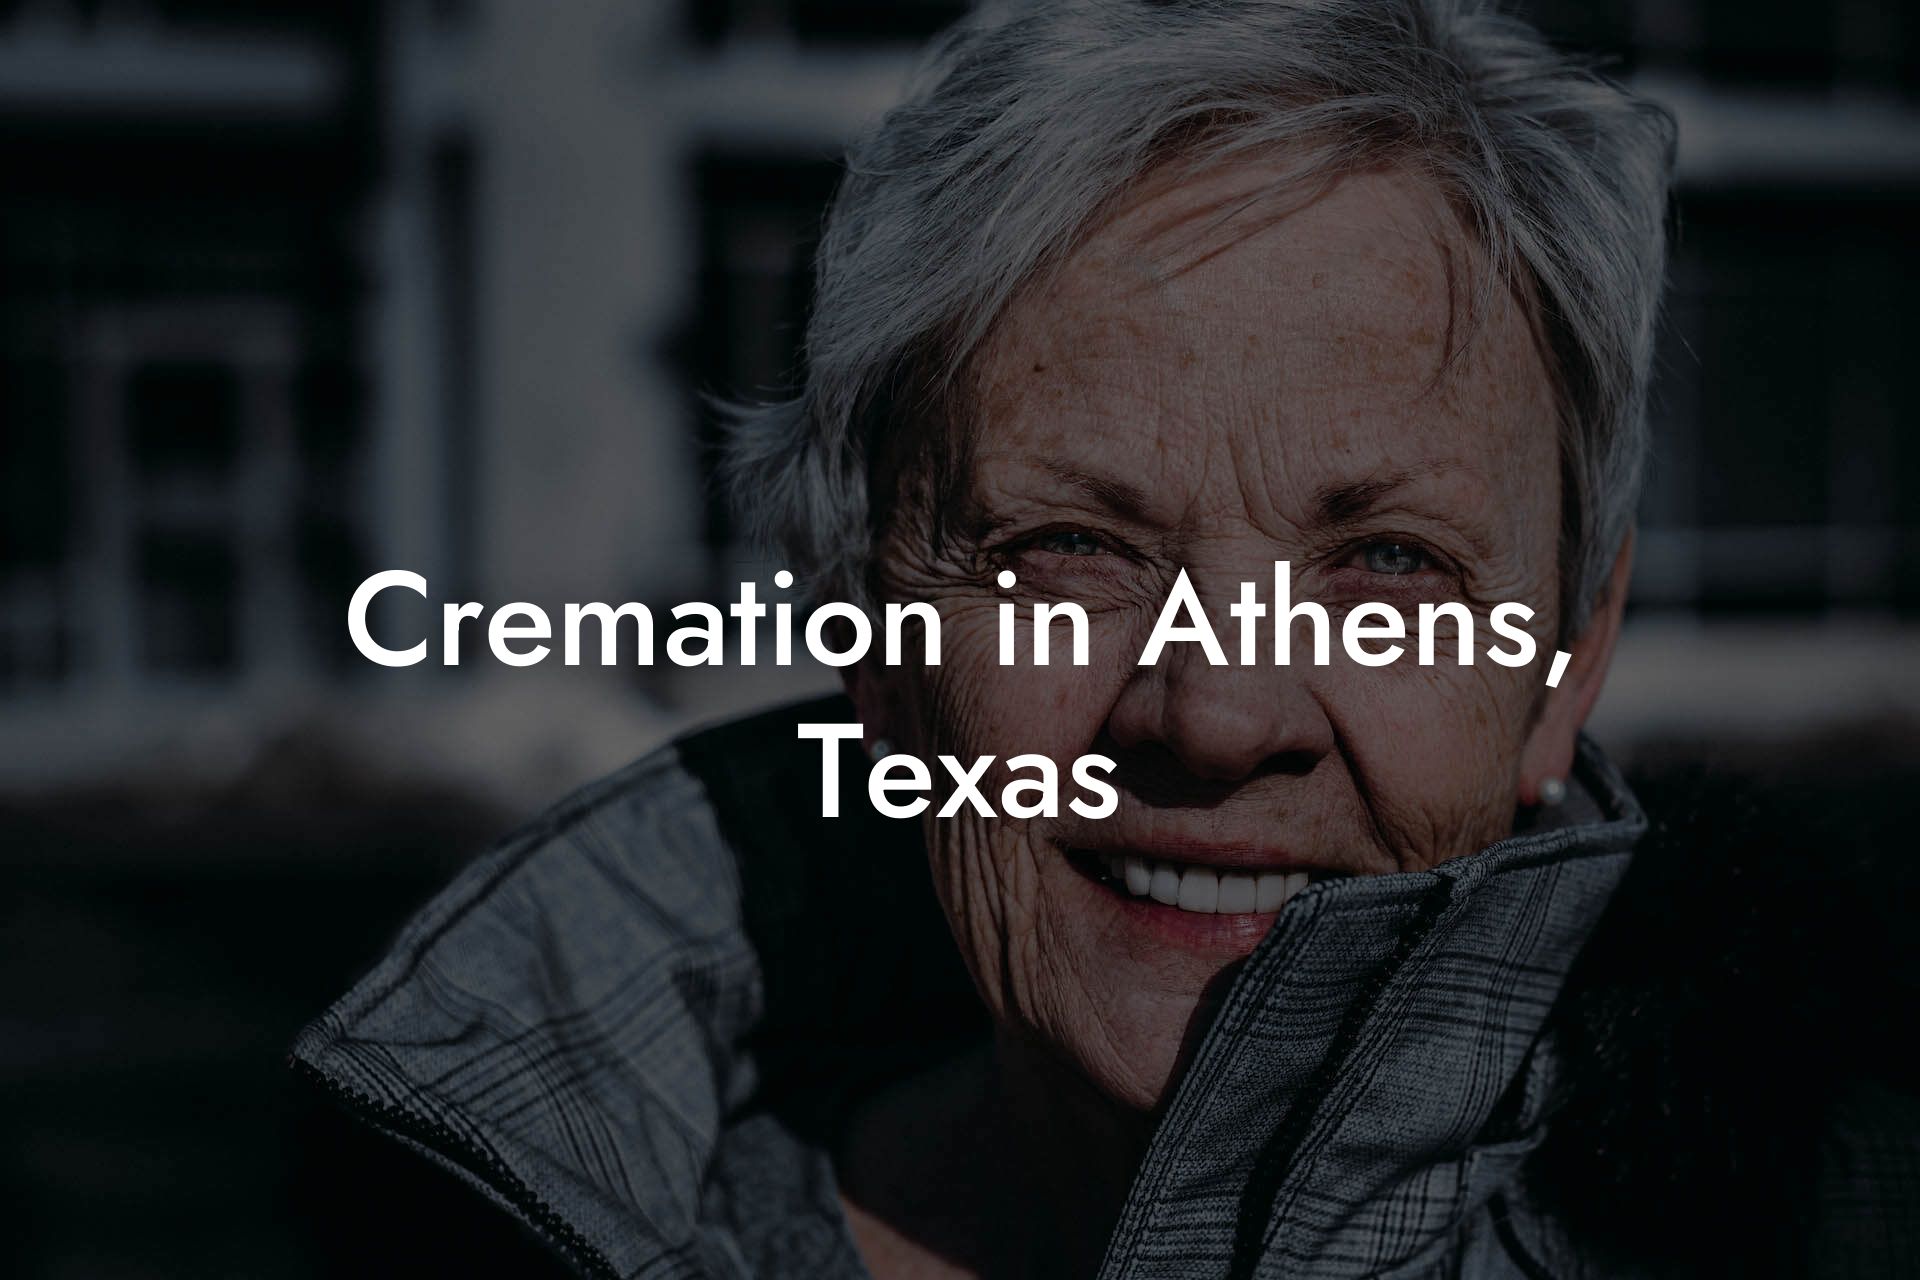 Cremation in Athens, Texas